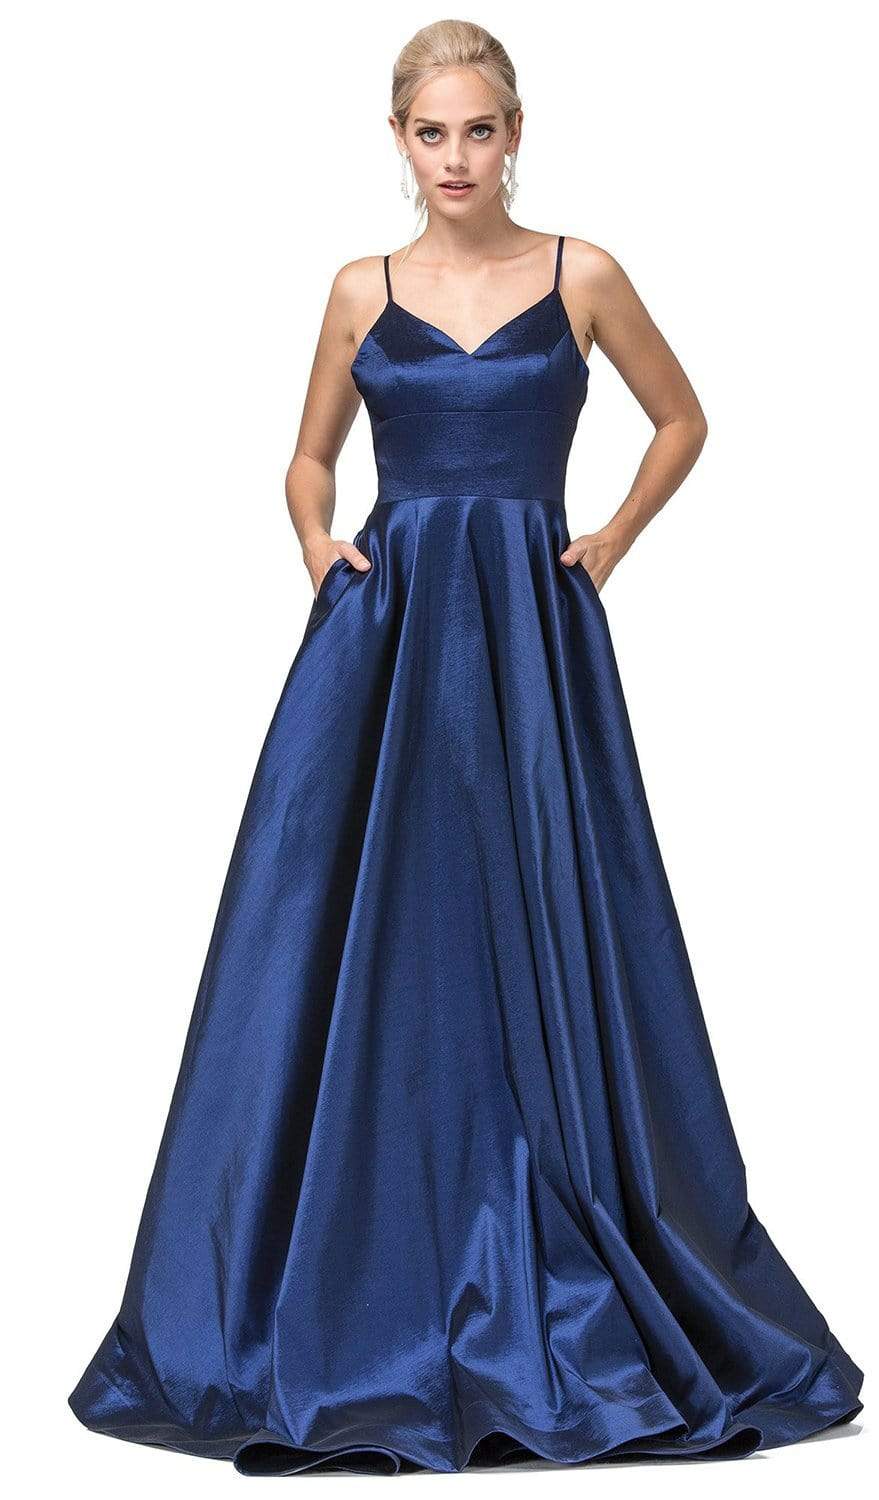 Dancing Queen - 2825 V-Neck Pleated A-Line Evening Gown
